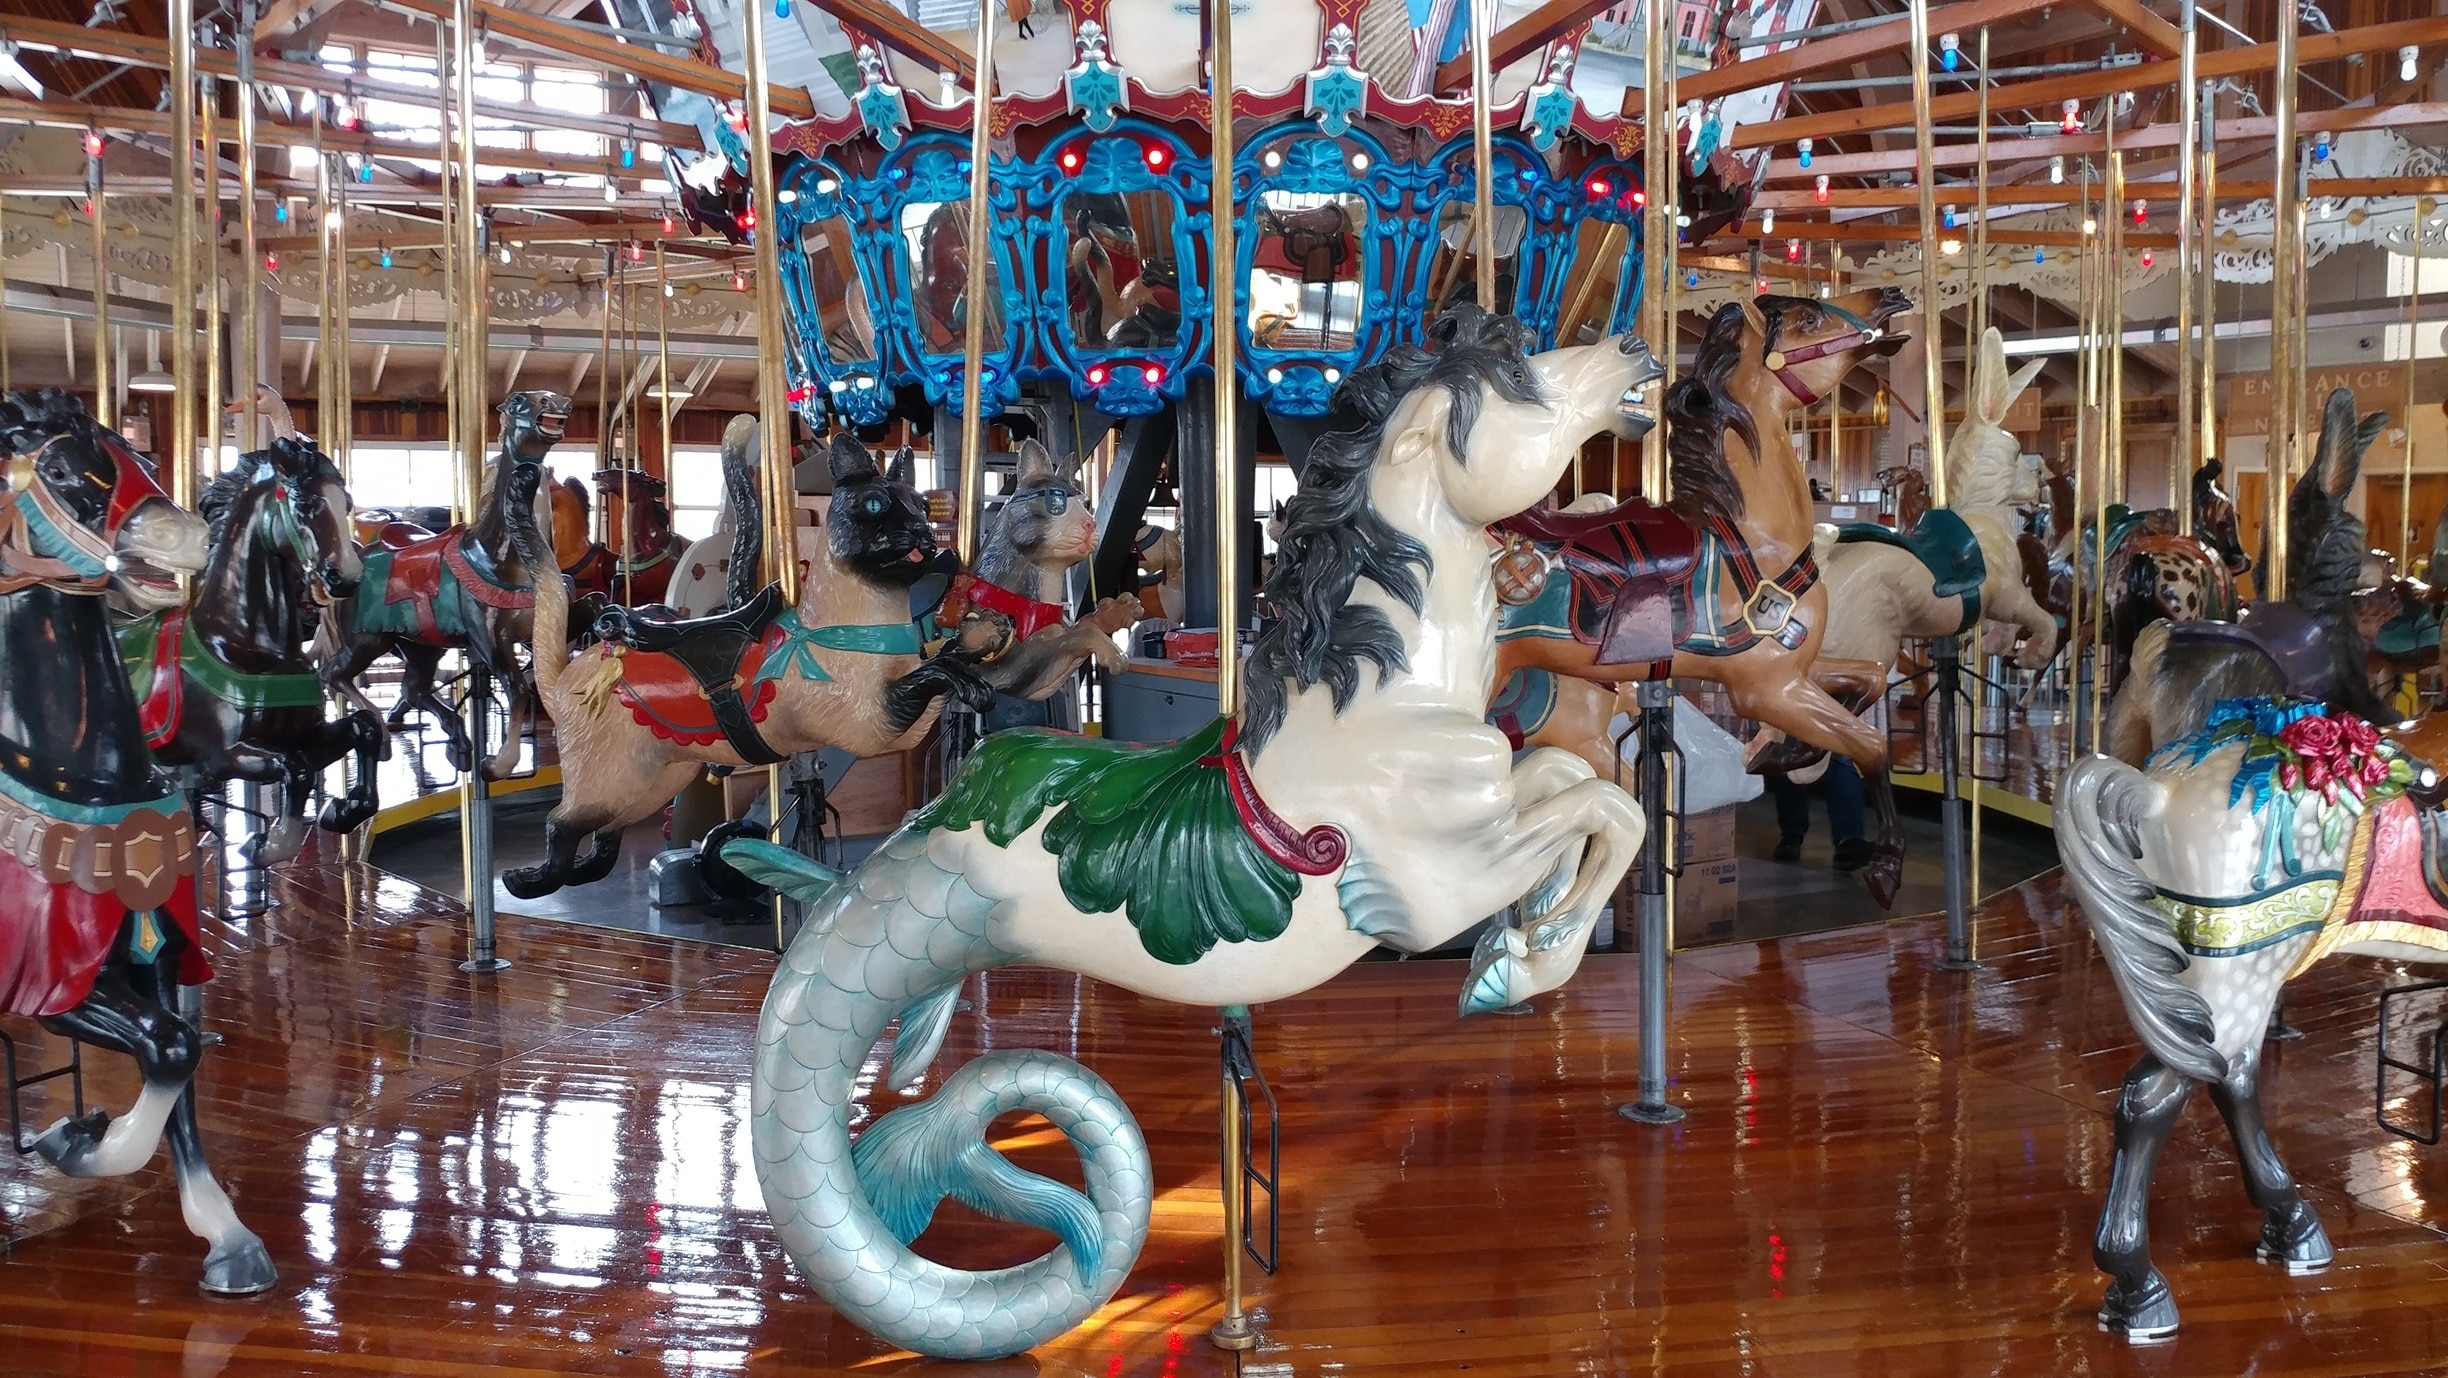 The Richland Carrousel is the first new, hand-carved carrousel to be built and operated in the United States since the 1930’s. 

All 52 figures were designed, carved and painted by Carousel Works of Mansfield. There are 30 horses and 22 menagerie figures, including four bears, four ostriches, four cats, four rabbits, a goat, giraffe, lion, tiger, zebra and a mythical hippocampus (part horse, part fish). 